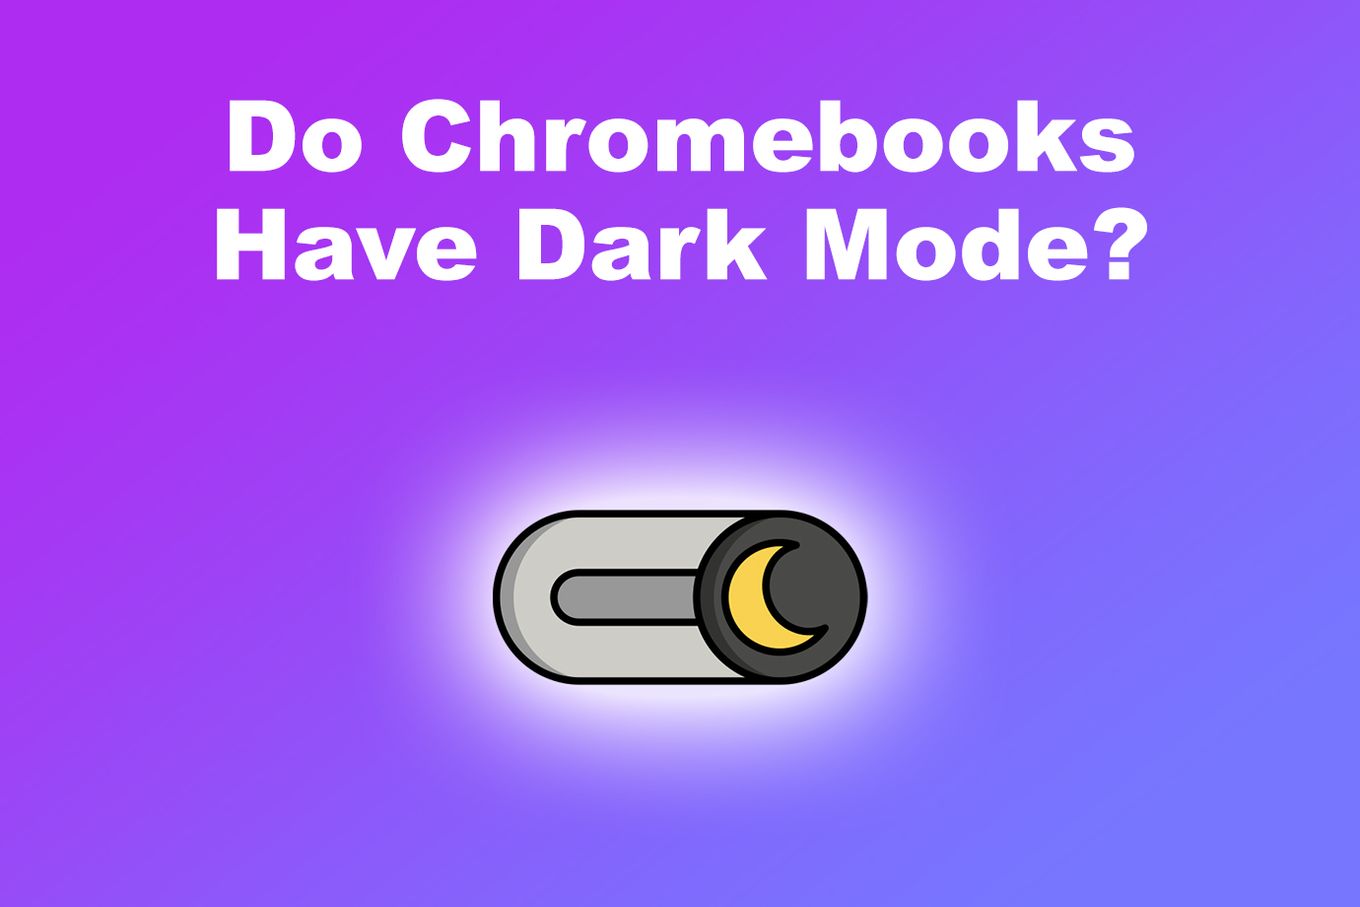 Time to Talk Tech : High Contrast Mode on a Chromebook (inverted colors)?